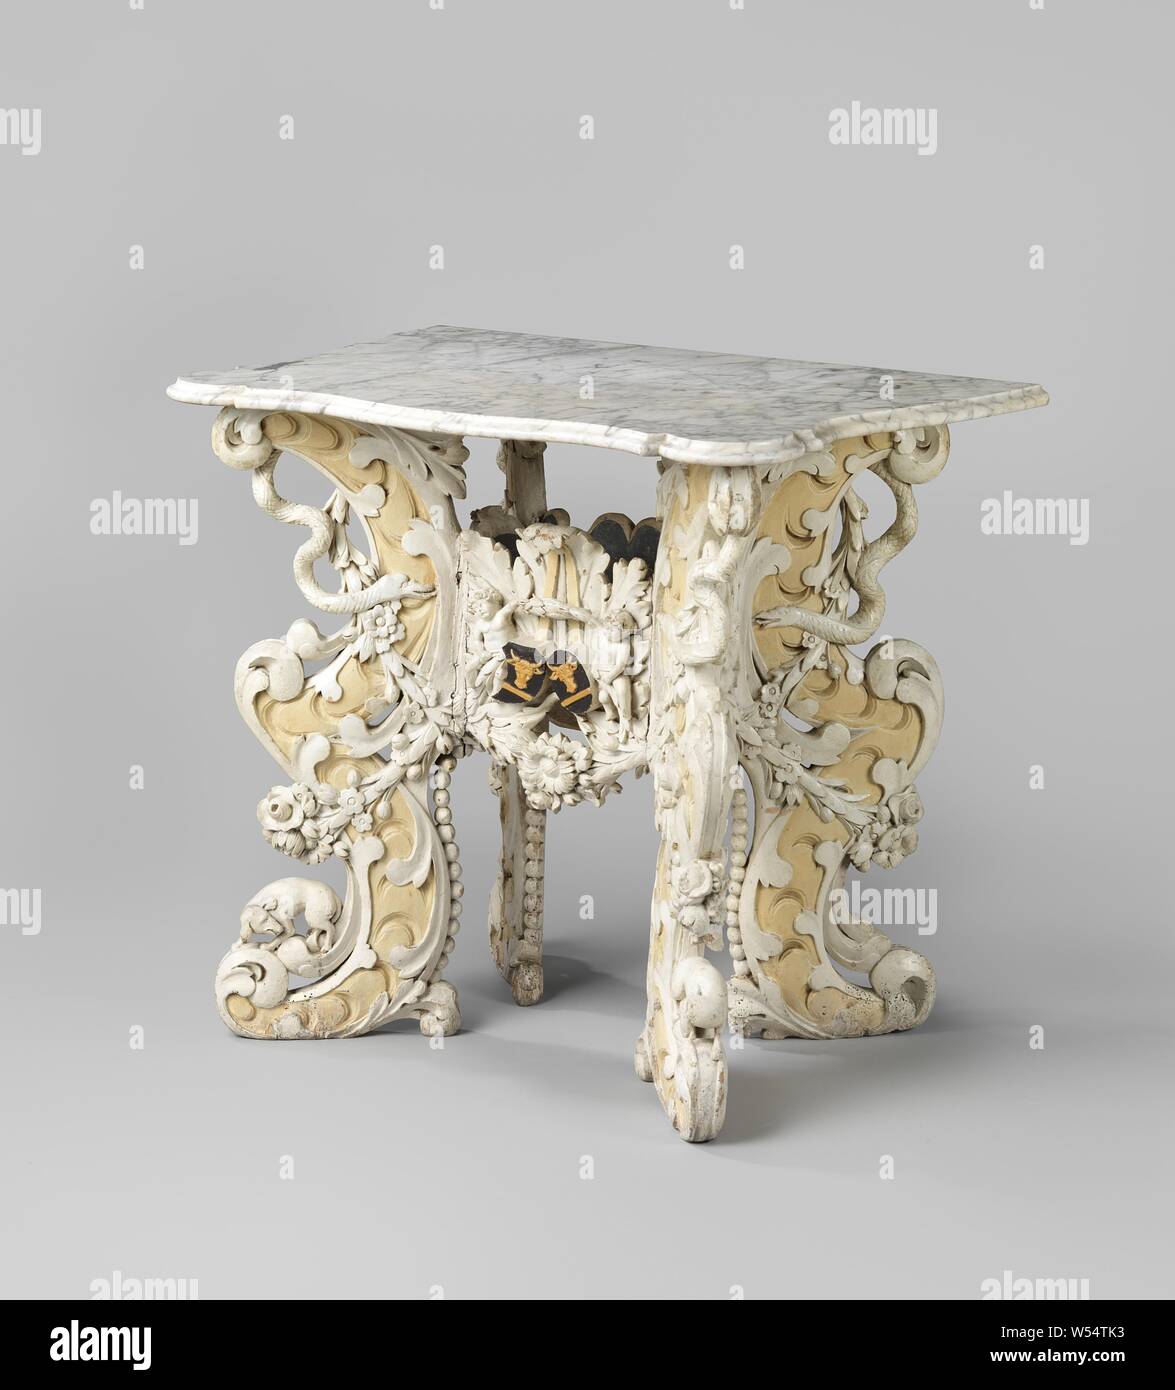 Table painted in white with four angled legs and carved, Table in white painted lime with four angled legs, made up of two C-volutes placed one above the other. The legs are decorated with acanthus leaves and on the back with pearl cords. At the bottom there is a dog, at the top a snake. The flat connecting line has a standing acanthus leaf at the front, for which a double coat of arms (each with a cow's head with a beam) in the middle of two putti. At the bottom a flower garland, which splits into two on the legs. Marble top., anonymous, Northern Netherlands, 1650 - 1700, wood (plant material Stock Photo